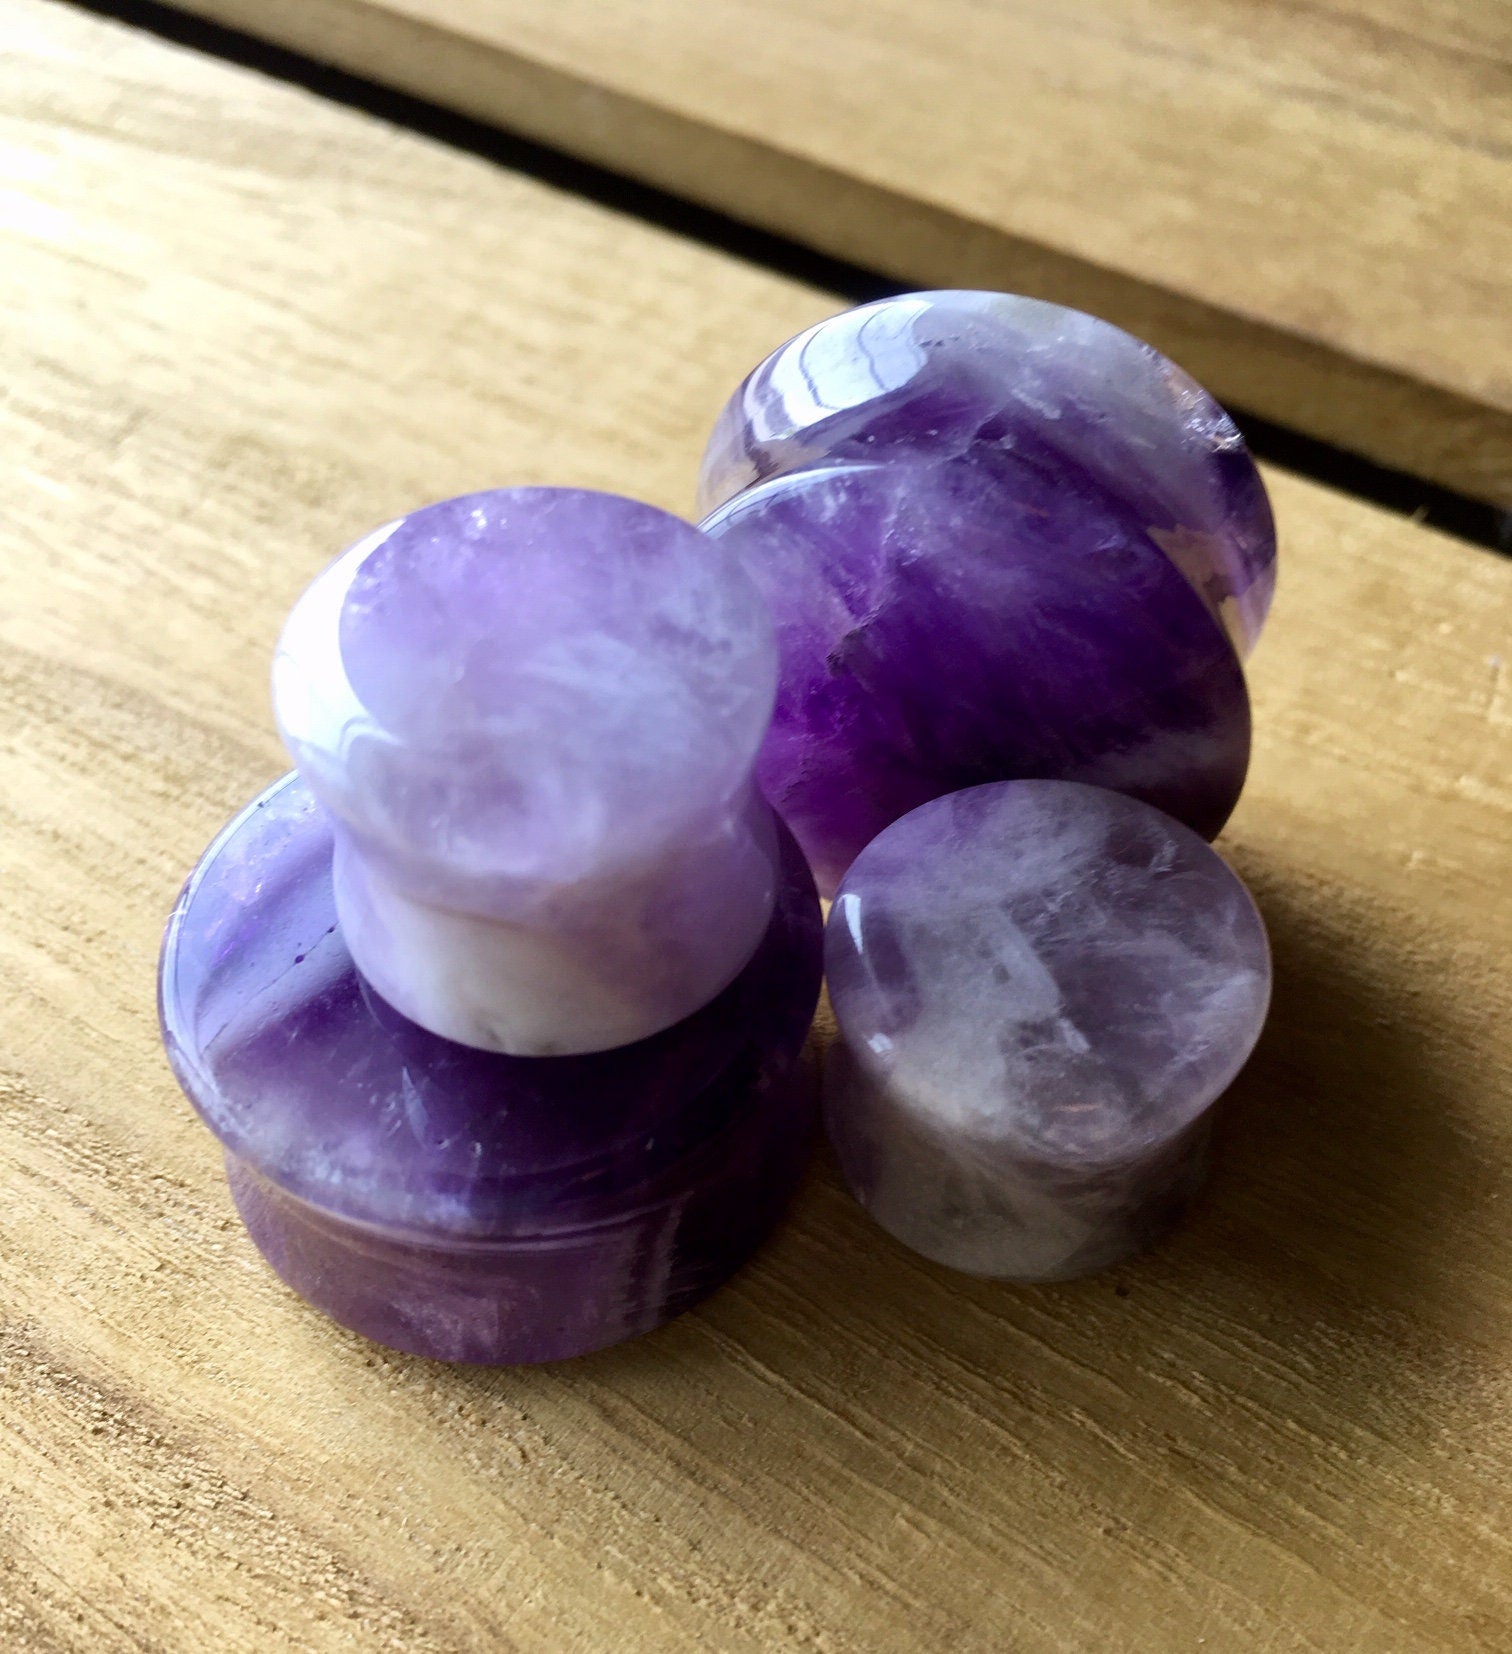 PAIR of Stunning Amethyst Organic Stone Plugs - Gauges 8g (3mm) up to 1" (25mm) available!